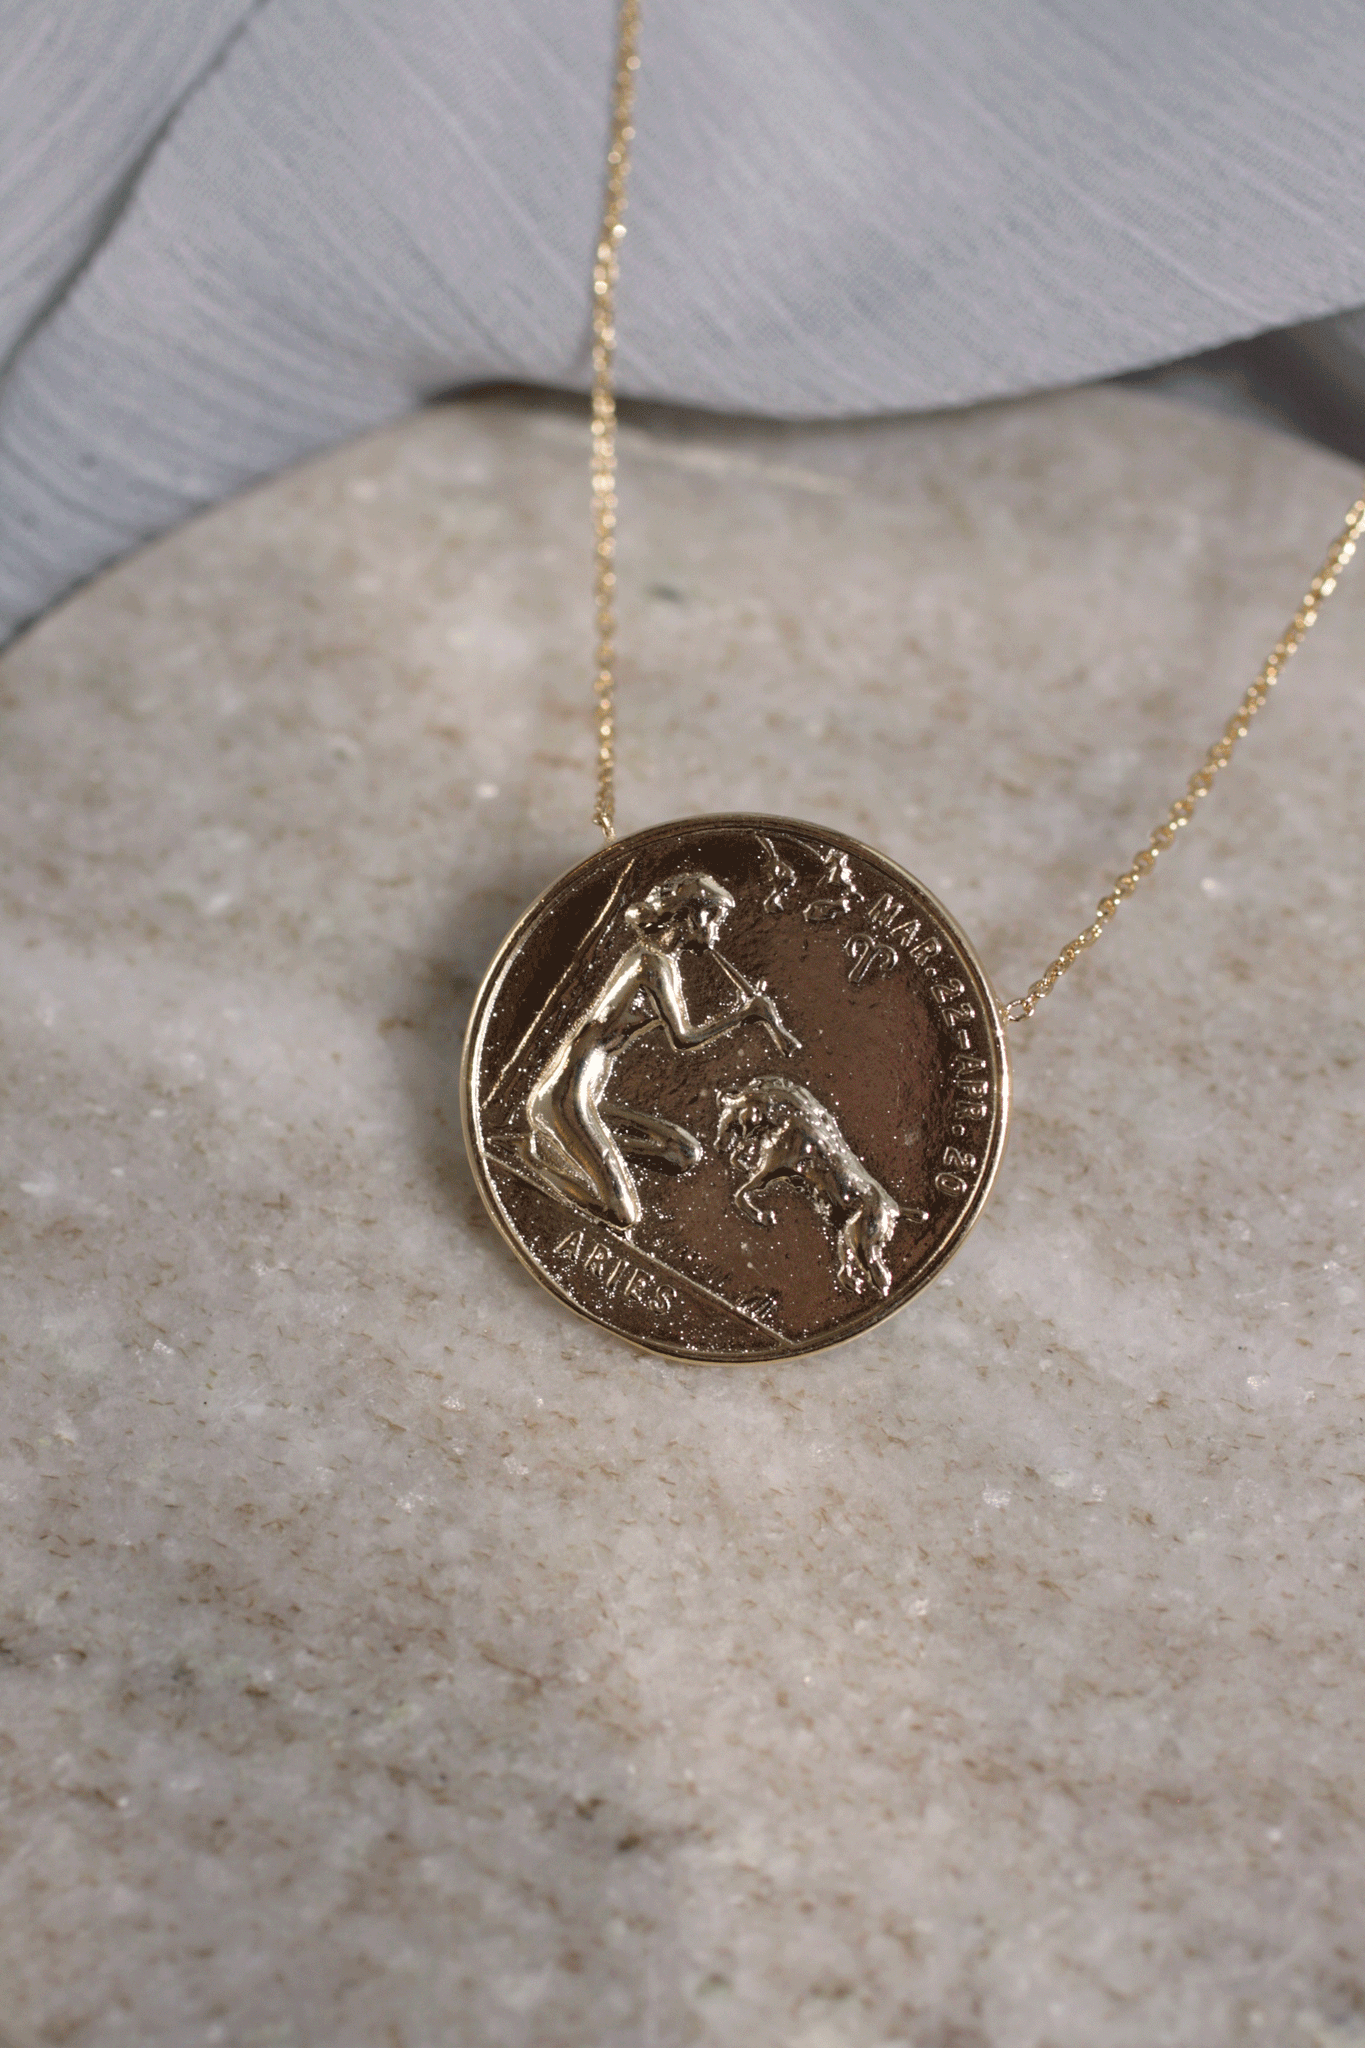 Vintage Inspired Zodiac Sign Coin Necklace